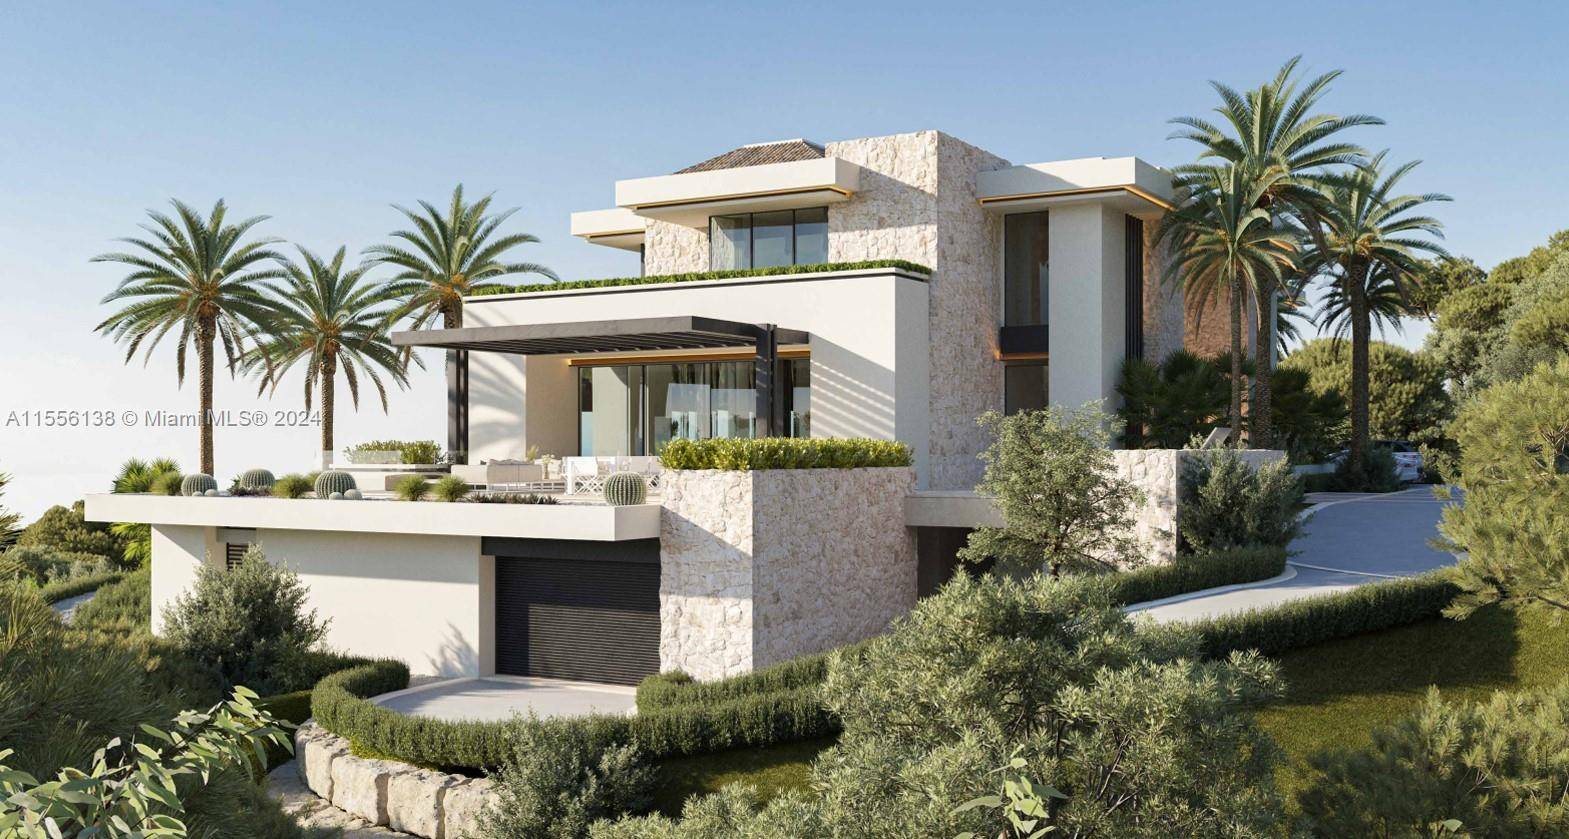 Property is located in Marbella, Spain.